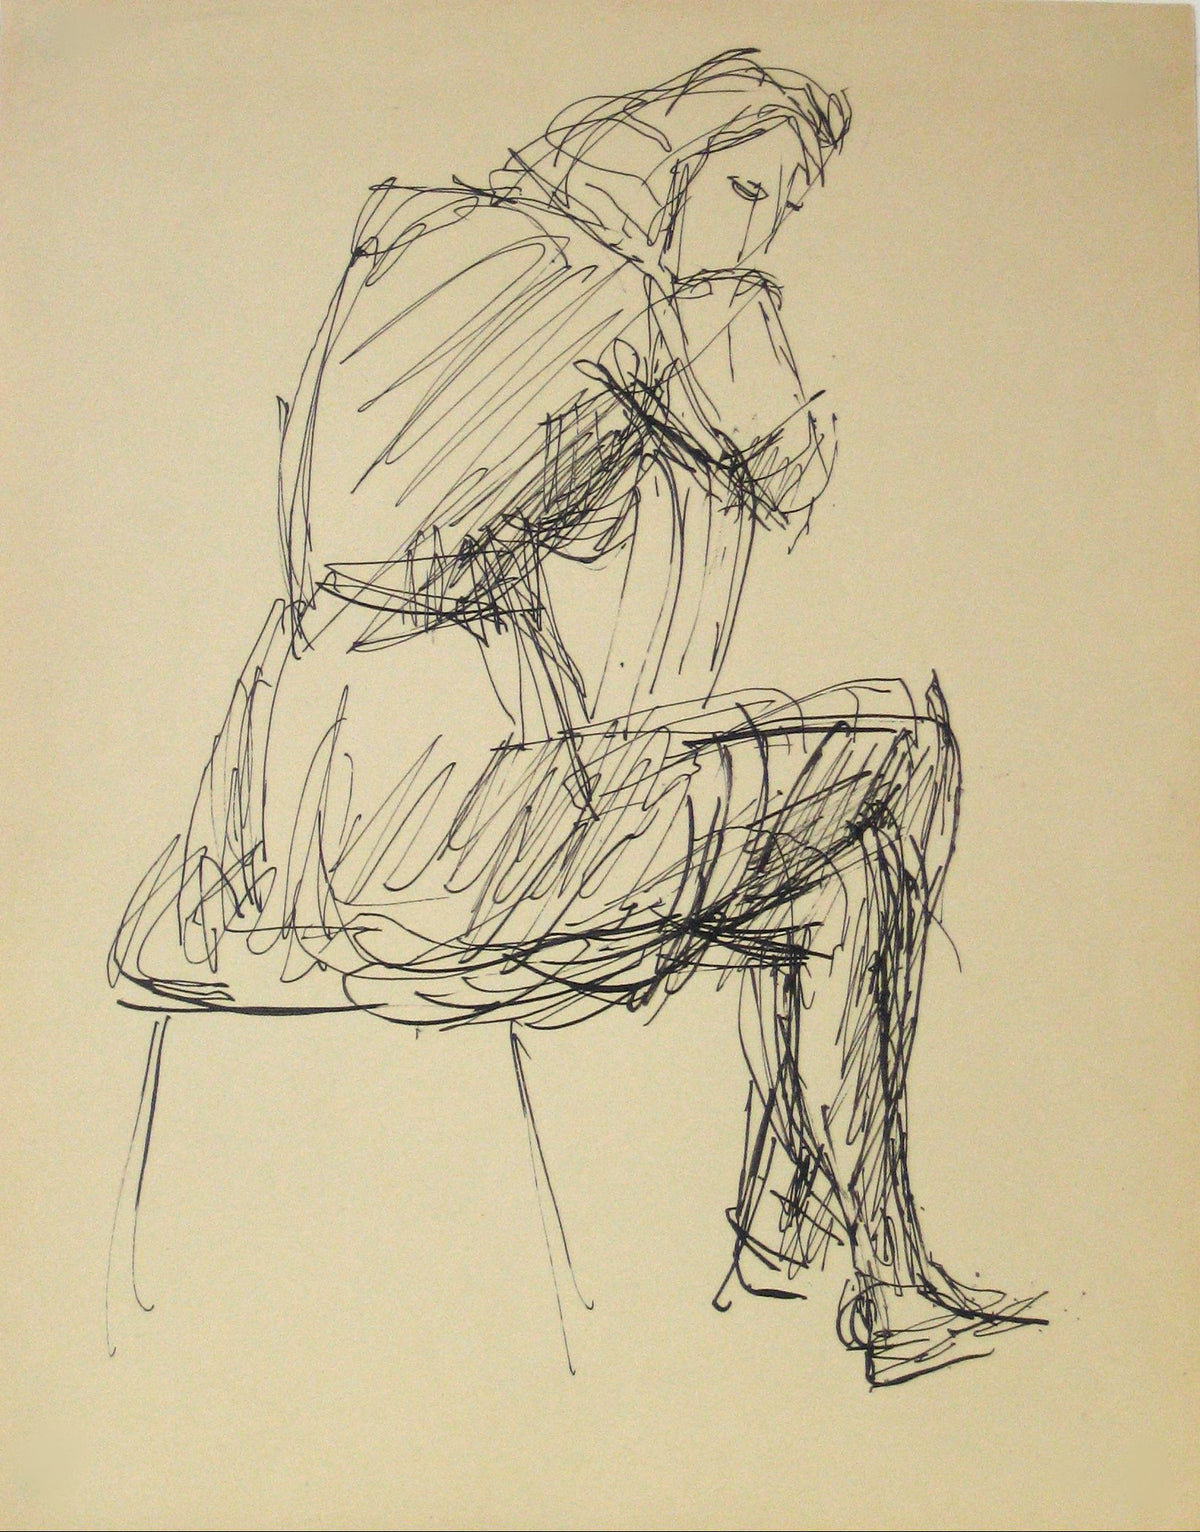 Woman in a Chair - Expressionist Drawing&lt;br&gt;Early-Mid 20th Century Ink&lt;br&gt;&lt;br&gt;#13631